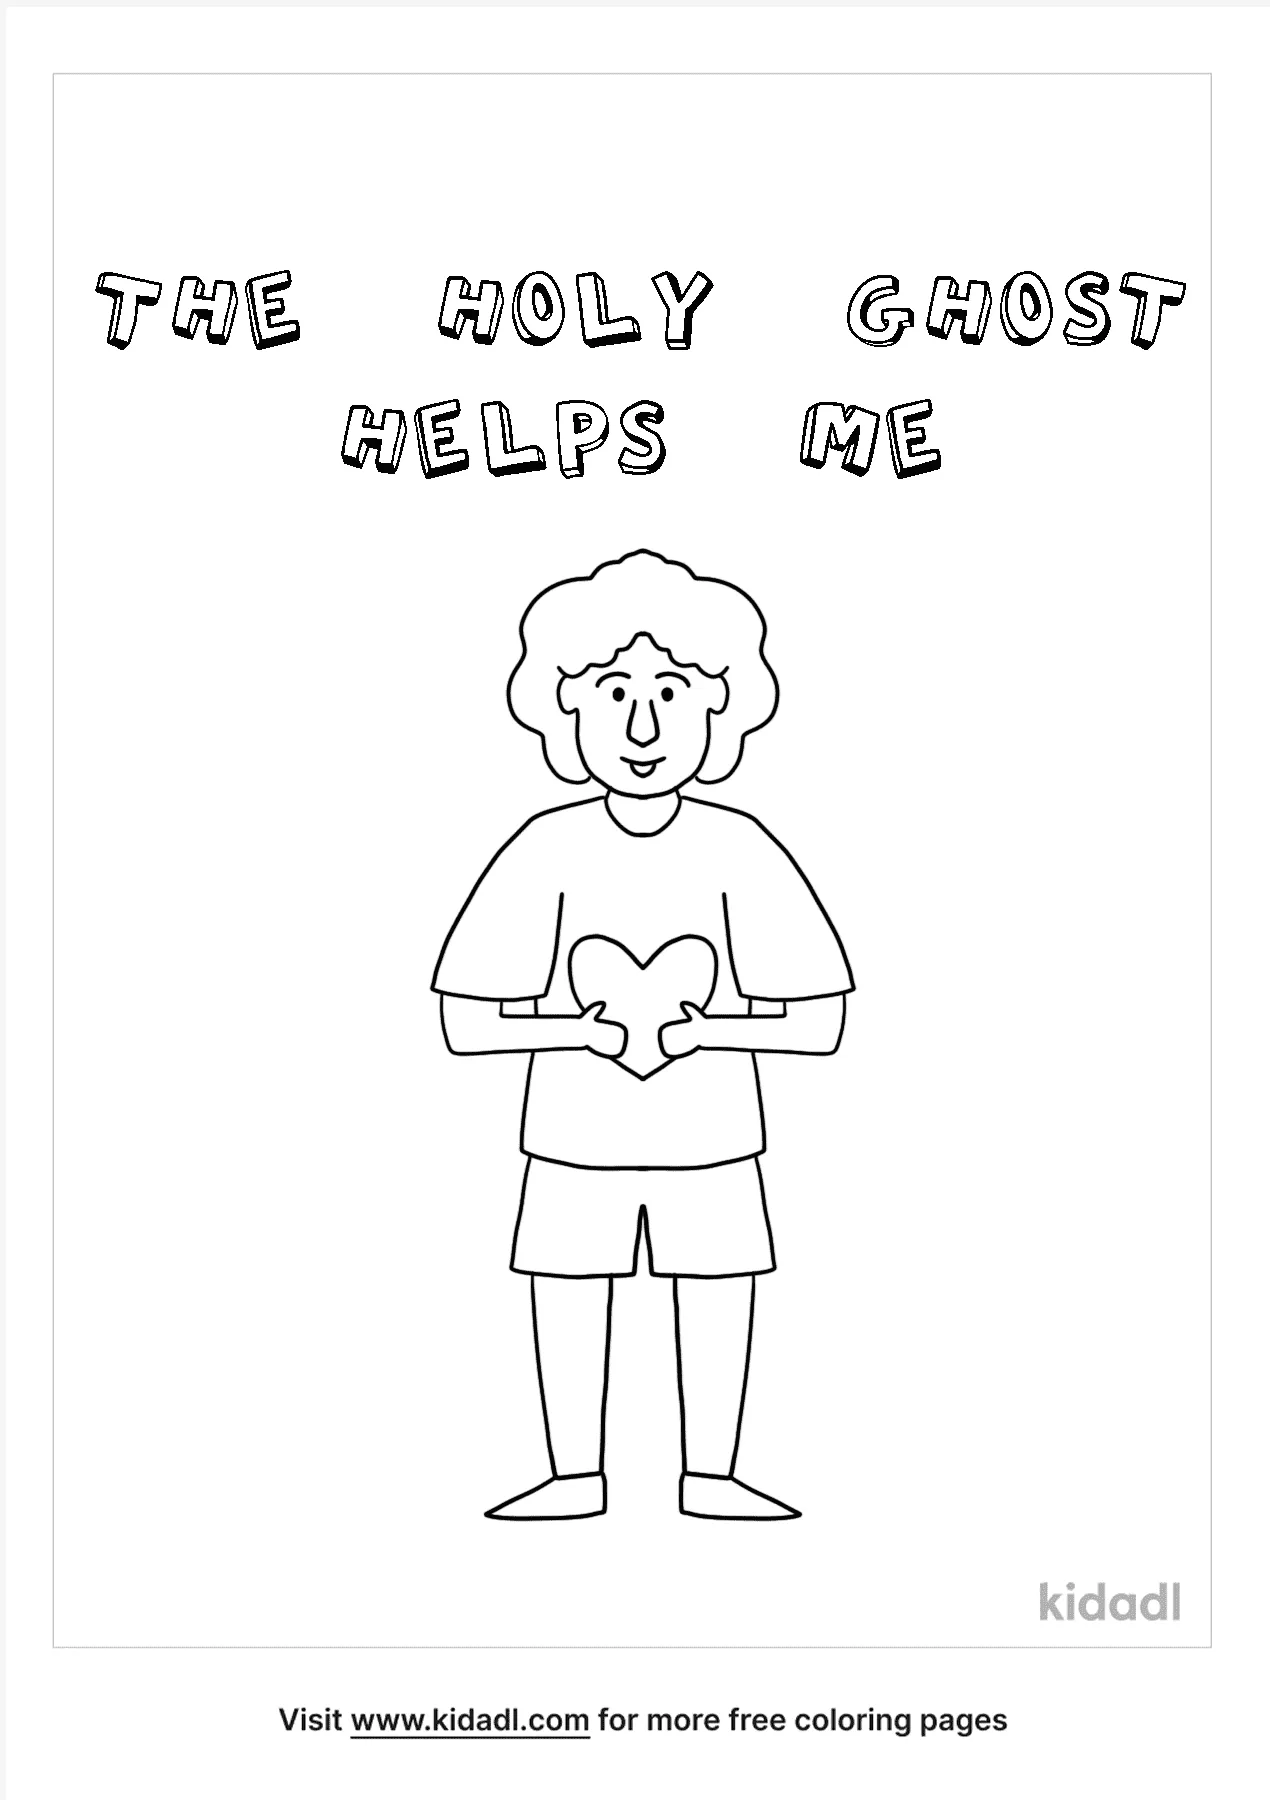 The Holy Ghost Helps Me Coloring Page